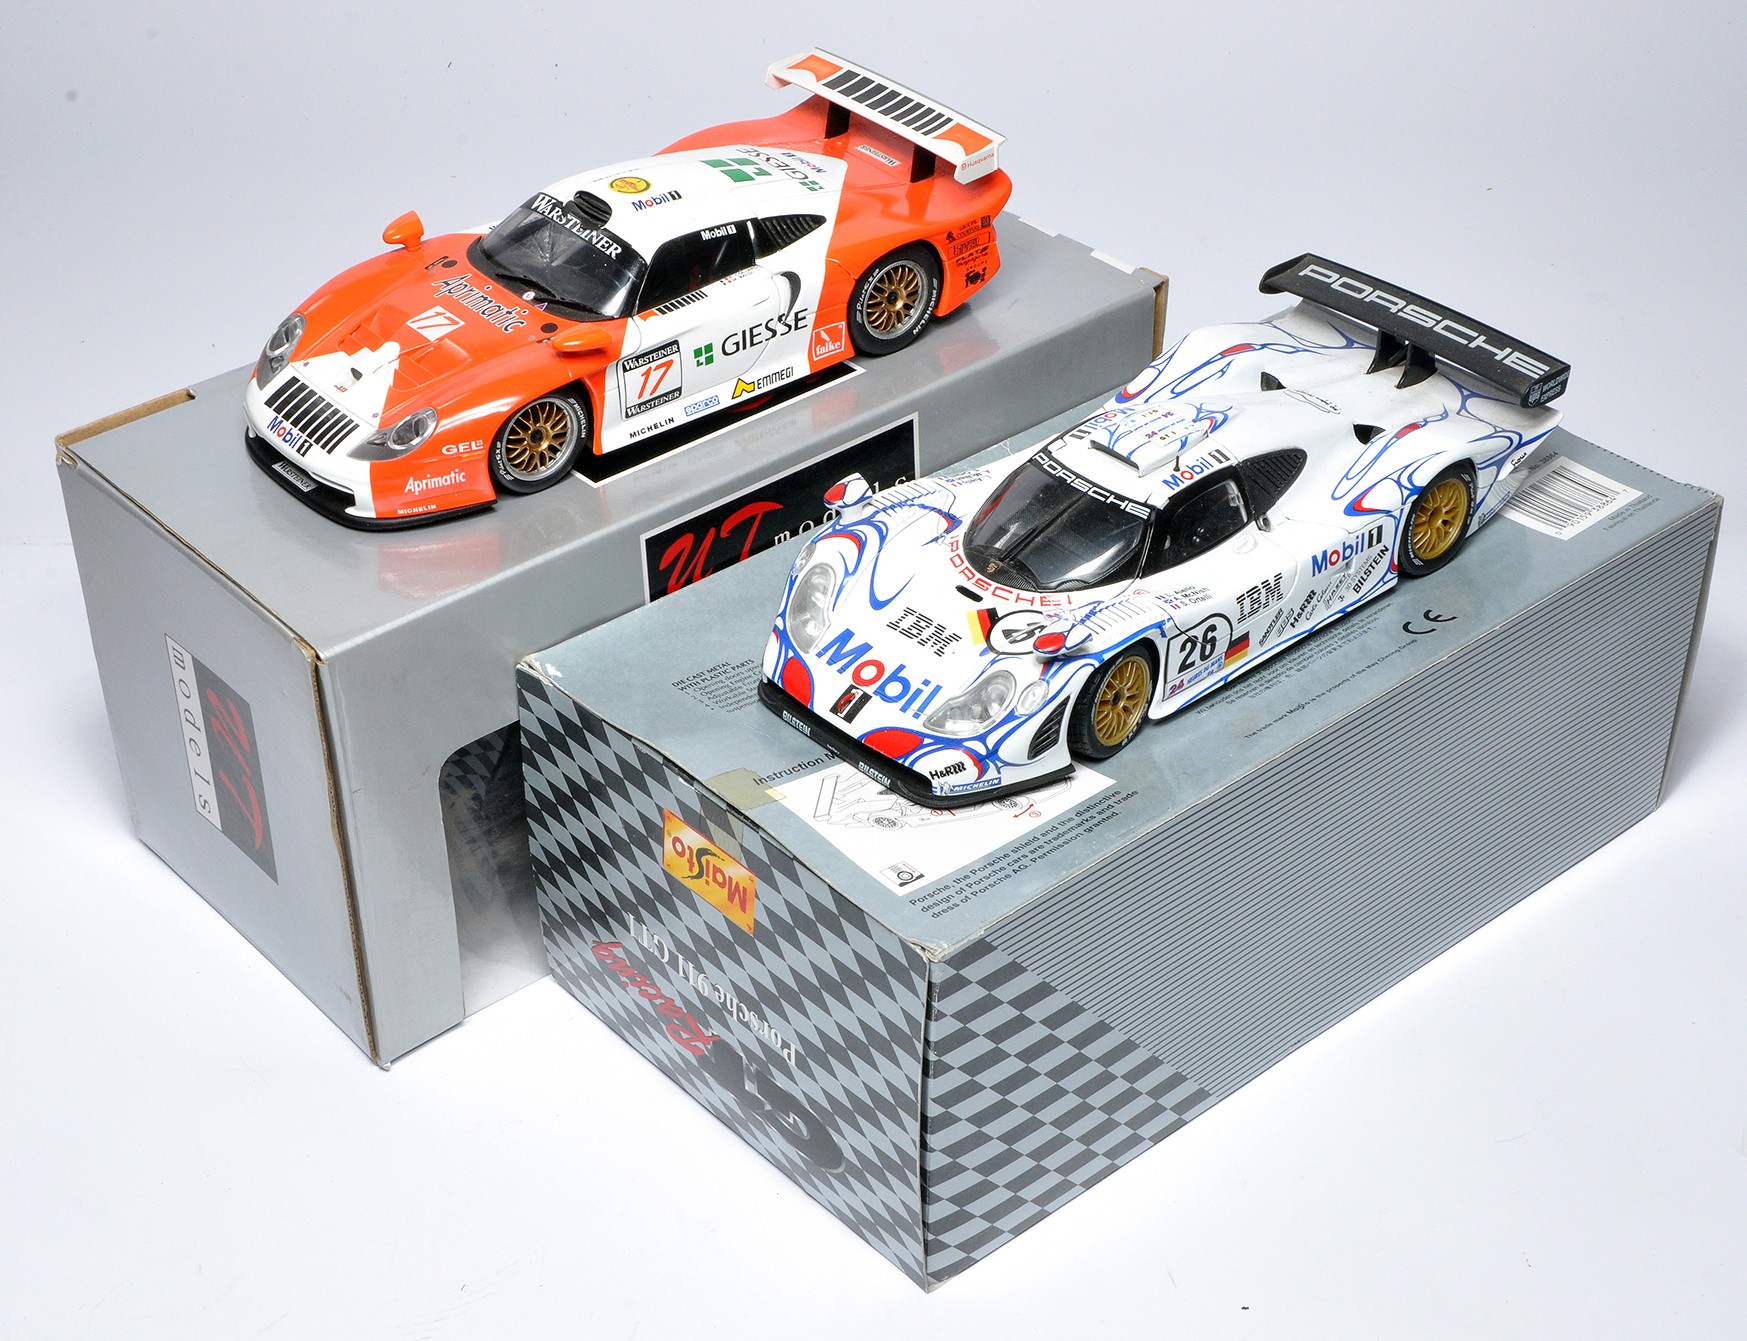 Duo of 1/18 diecast model racing cars (Le Mans) from Maisto and UT Models. Look generally good, with